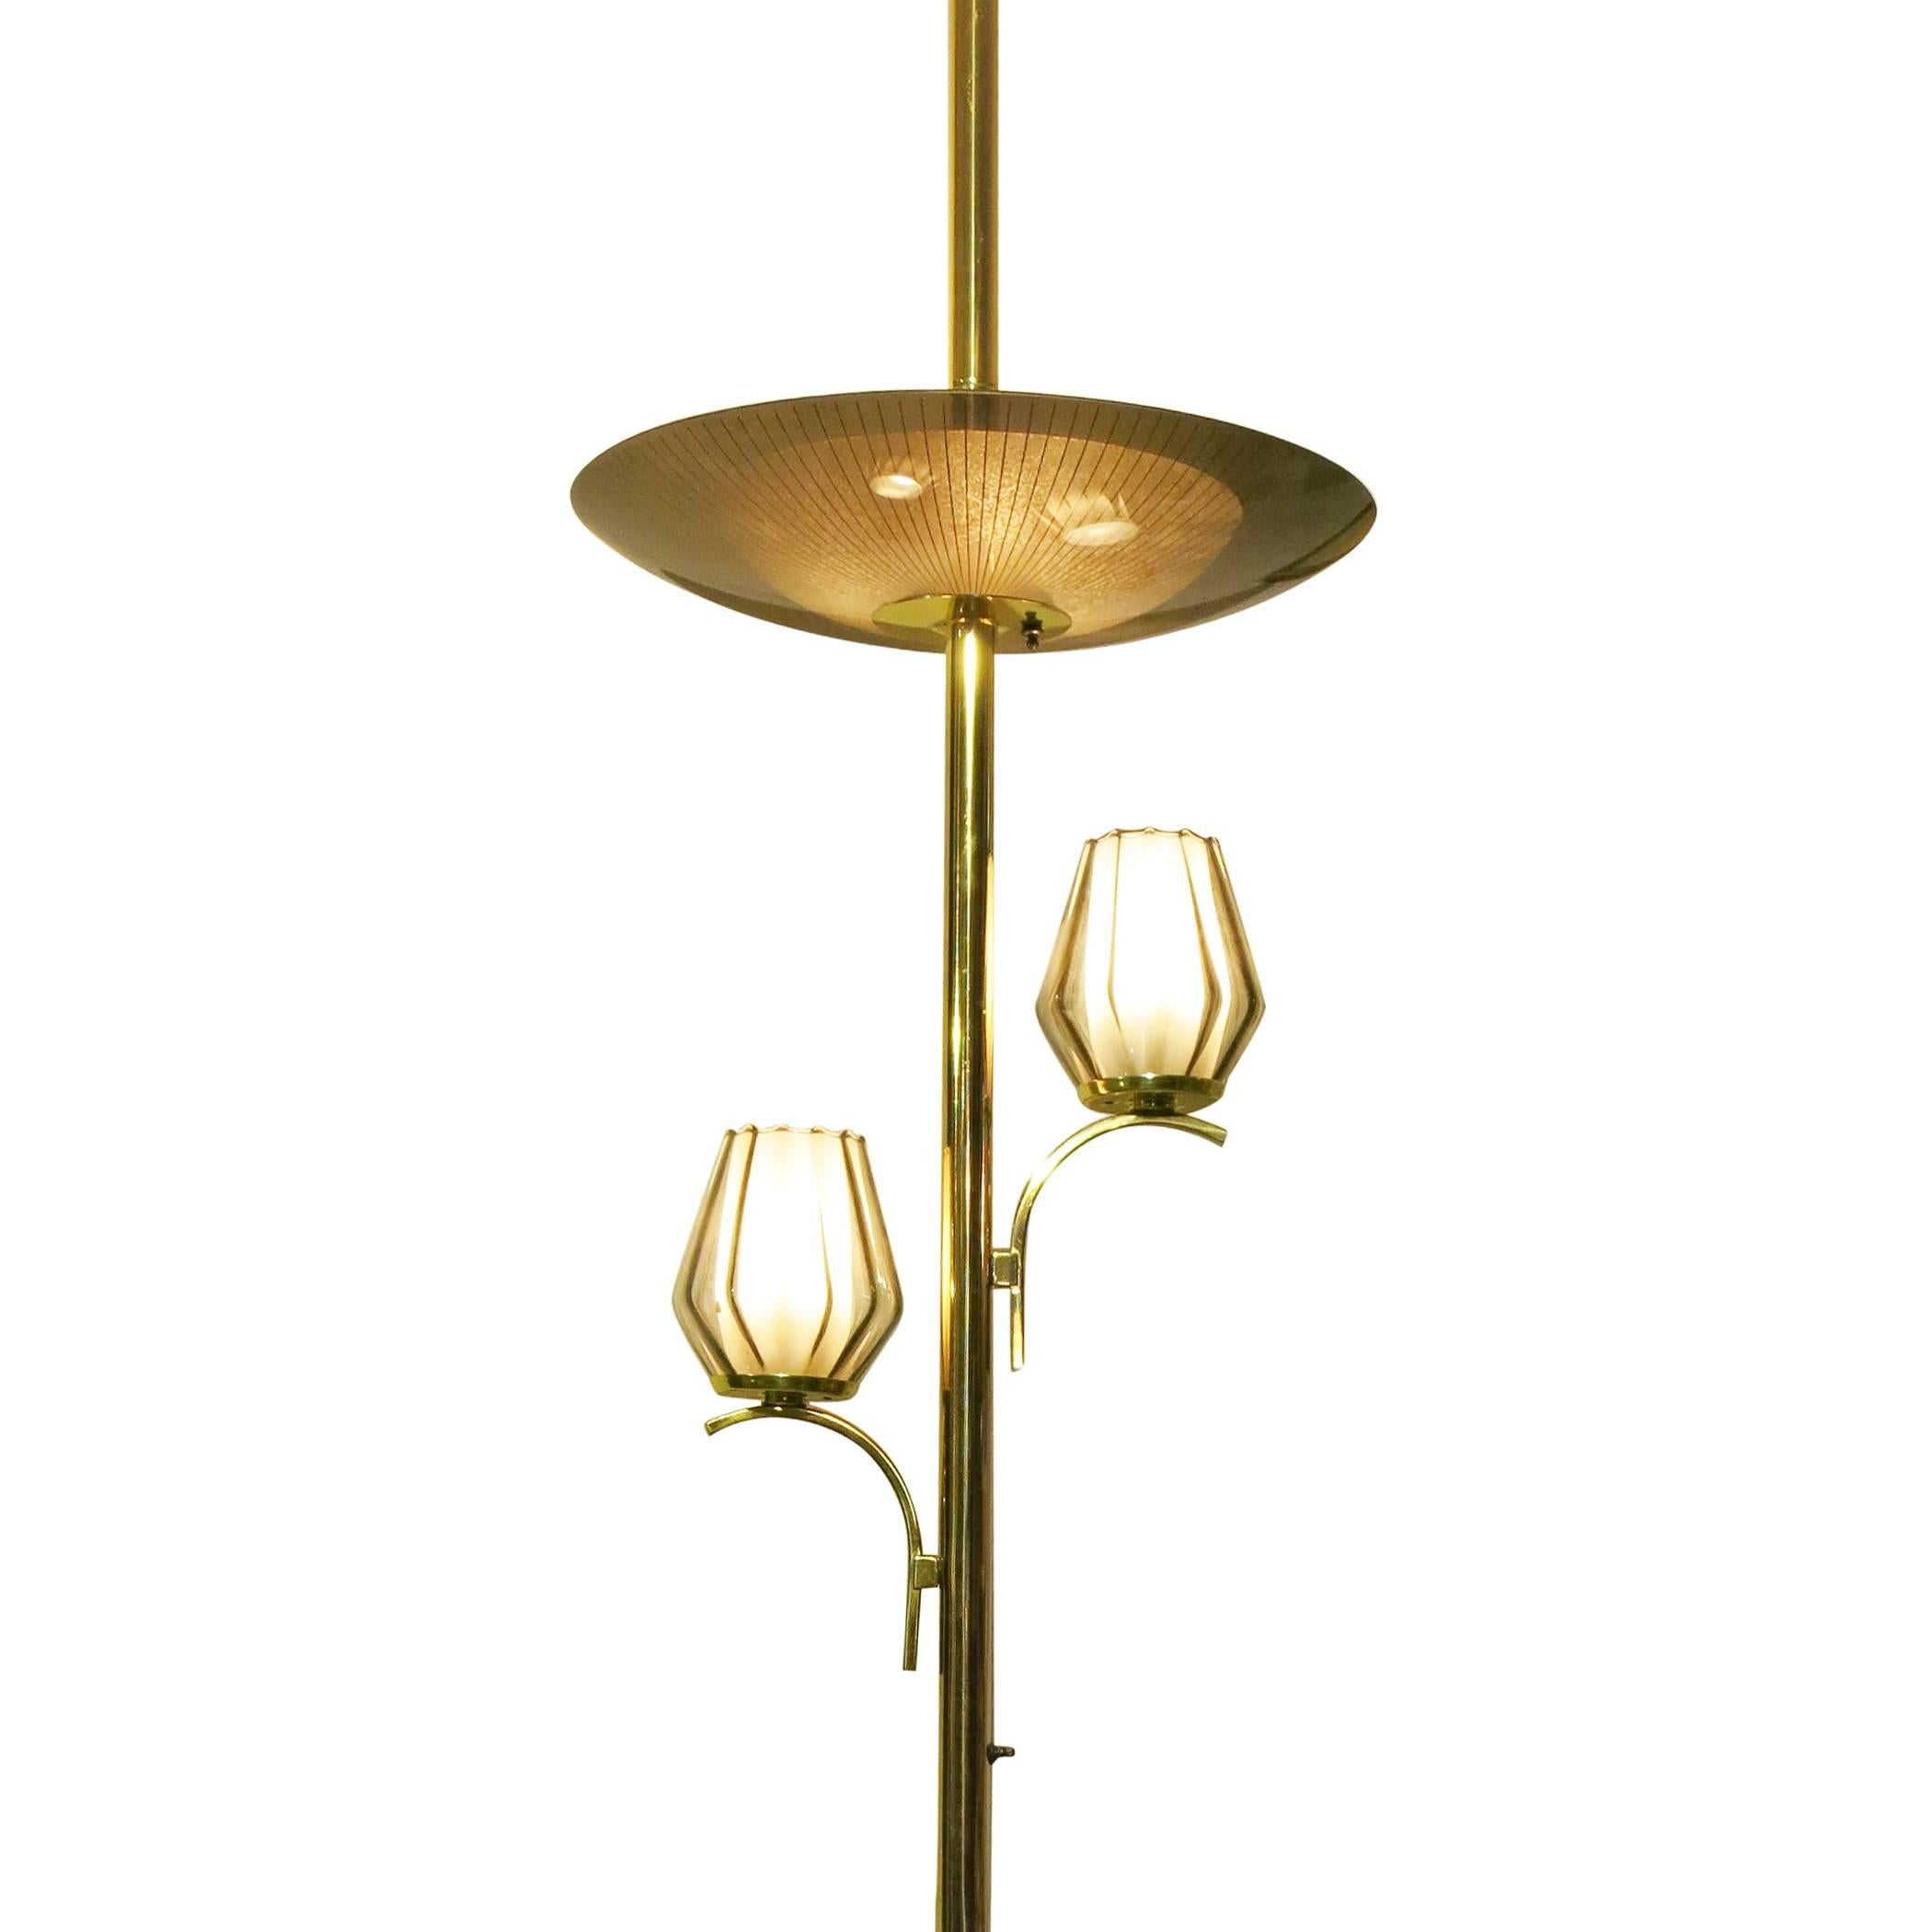 Mid-century brass triple light floor to ceiling tension pole lamp. This lamp features a unique tension pole lamp features an adjustable brass pole which adjust to the size of you ceiling (95